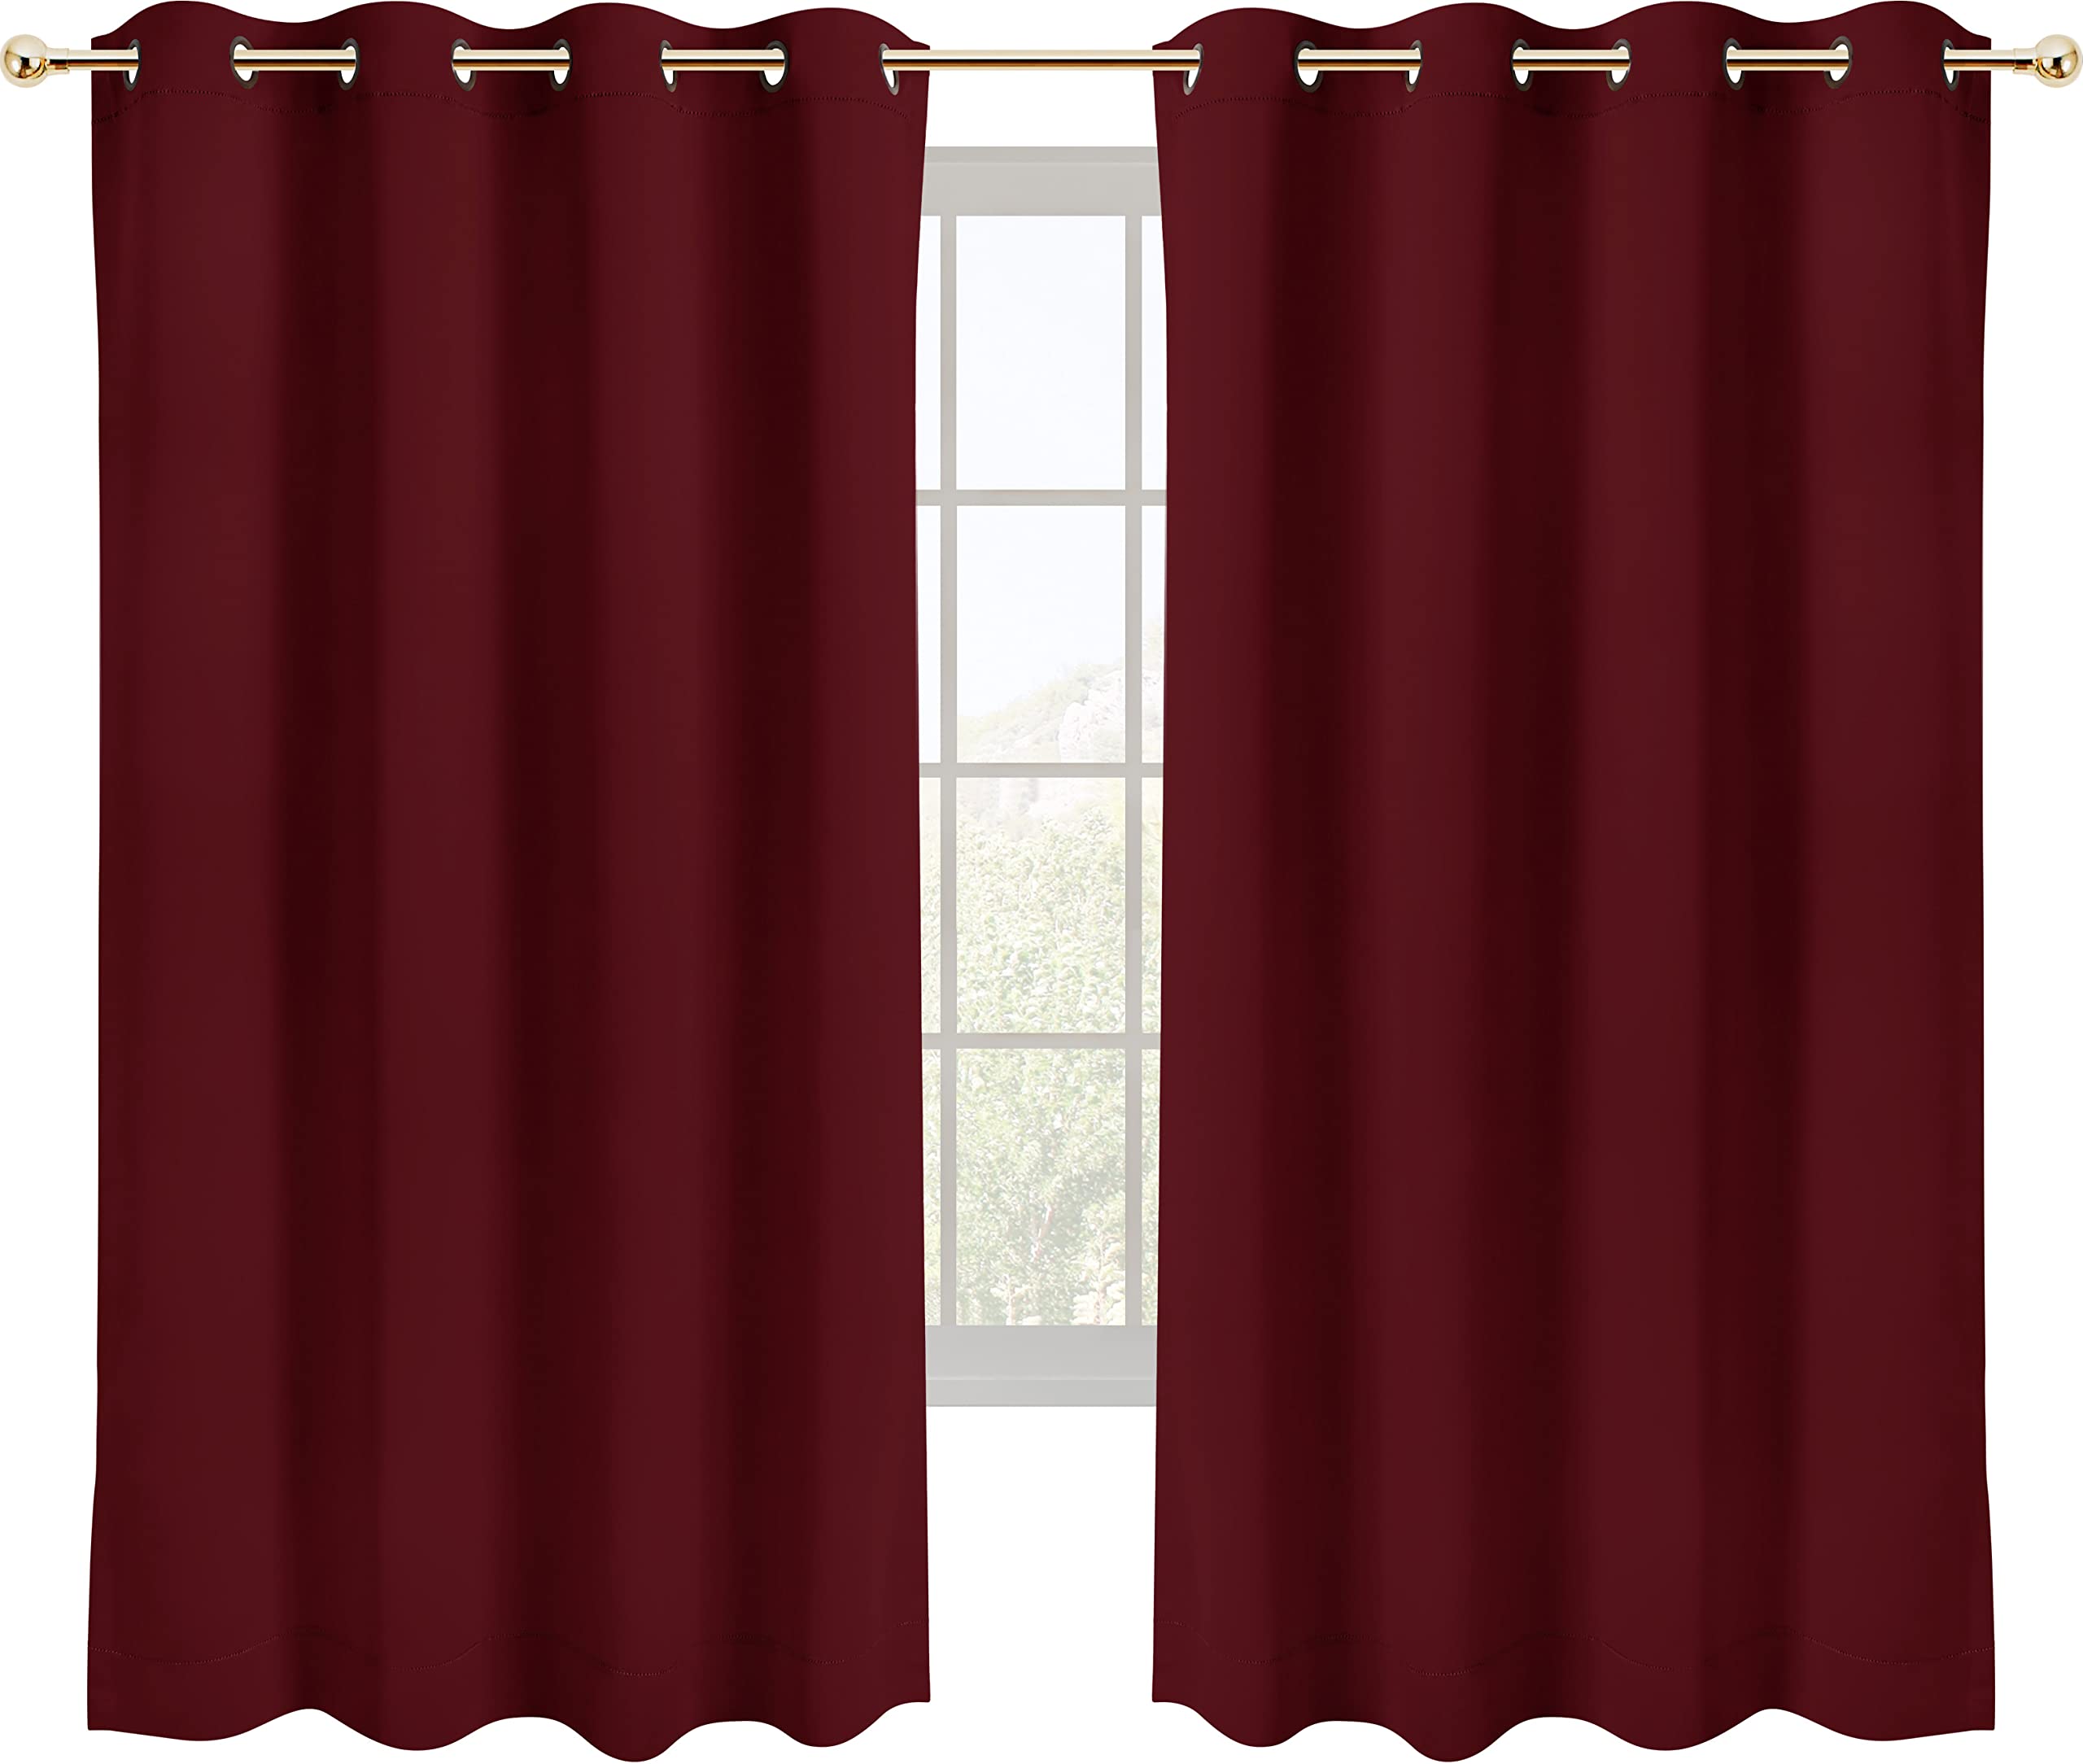 Book Cover Utopia Bedding Blackout Curtains for Bedroom, Grommet Window Curtains 63 Inch Length 2 Panels, Thermal Insulated Drapes for Living Room (Burgundy, 52W x 63L Inches) Burgundy 52W x 63L Inches